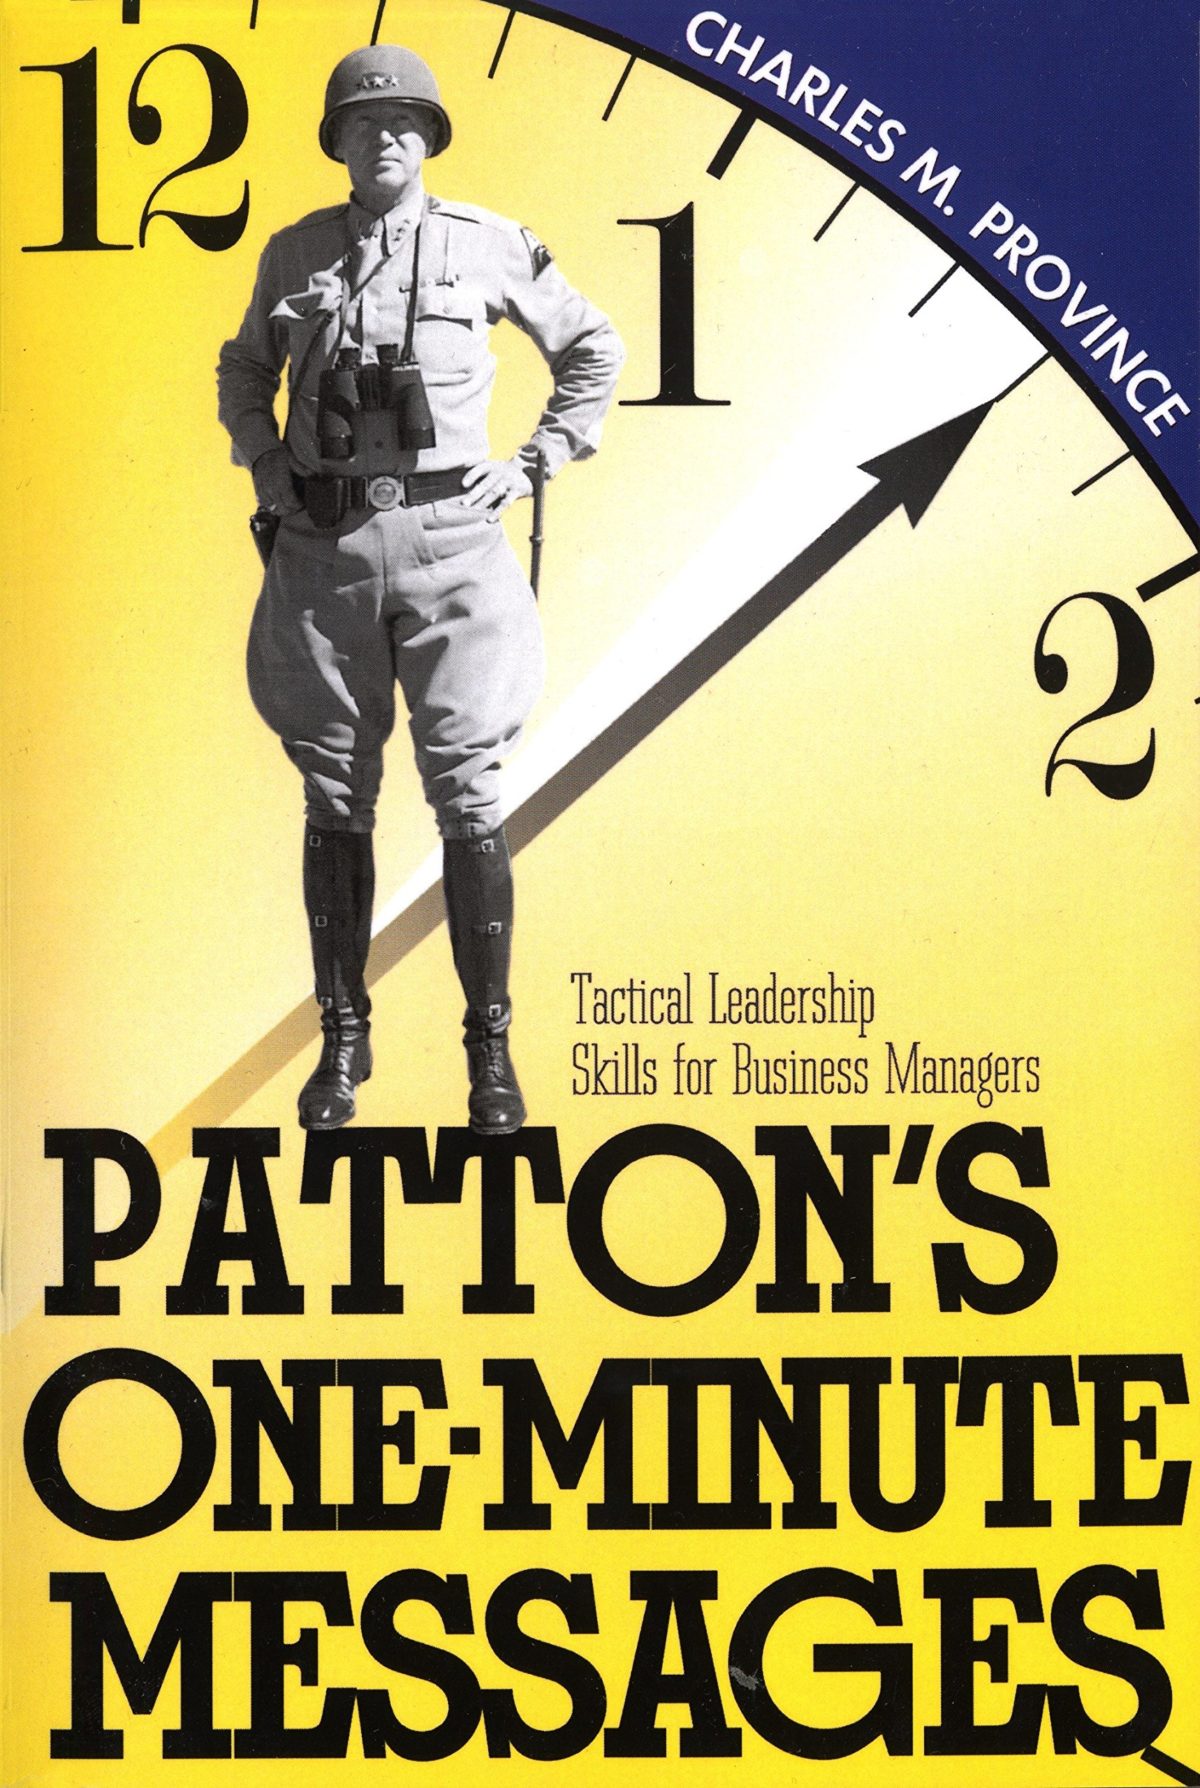 Patton’s One-Minute Messages: Tactical Leadership Book